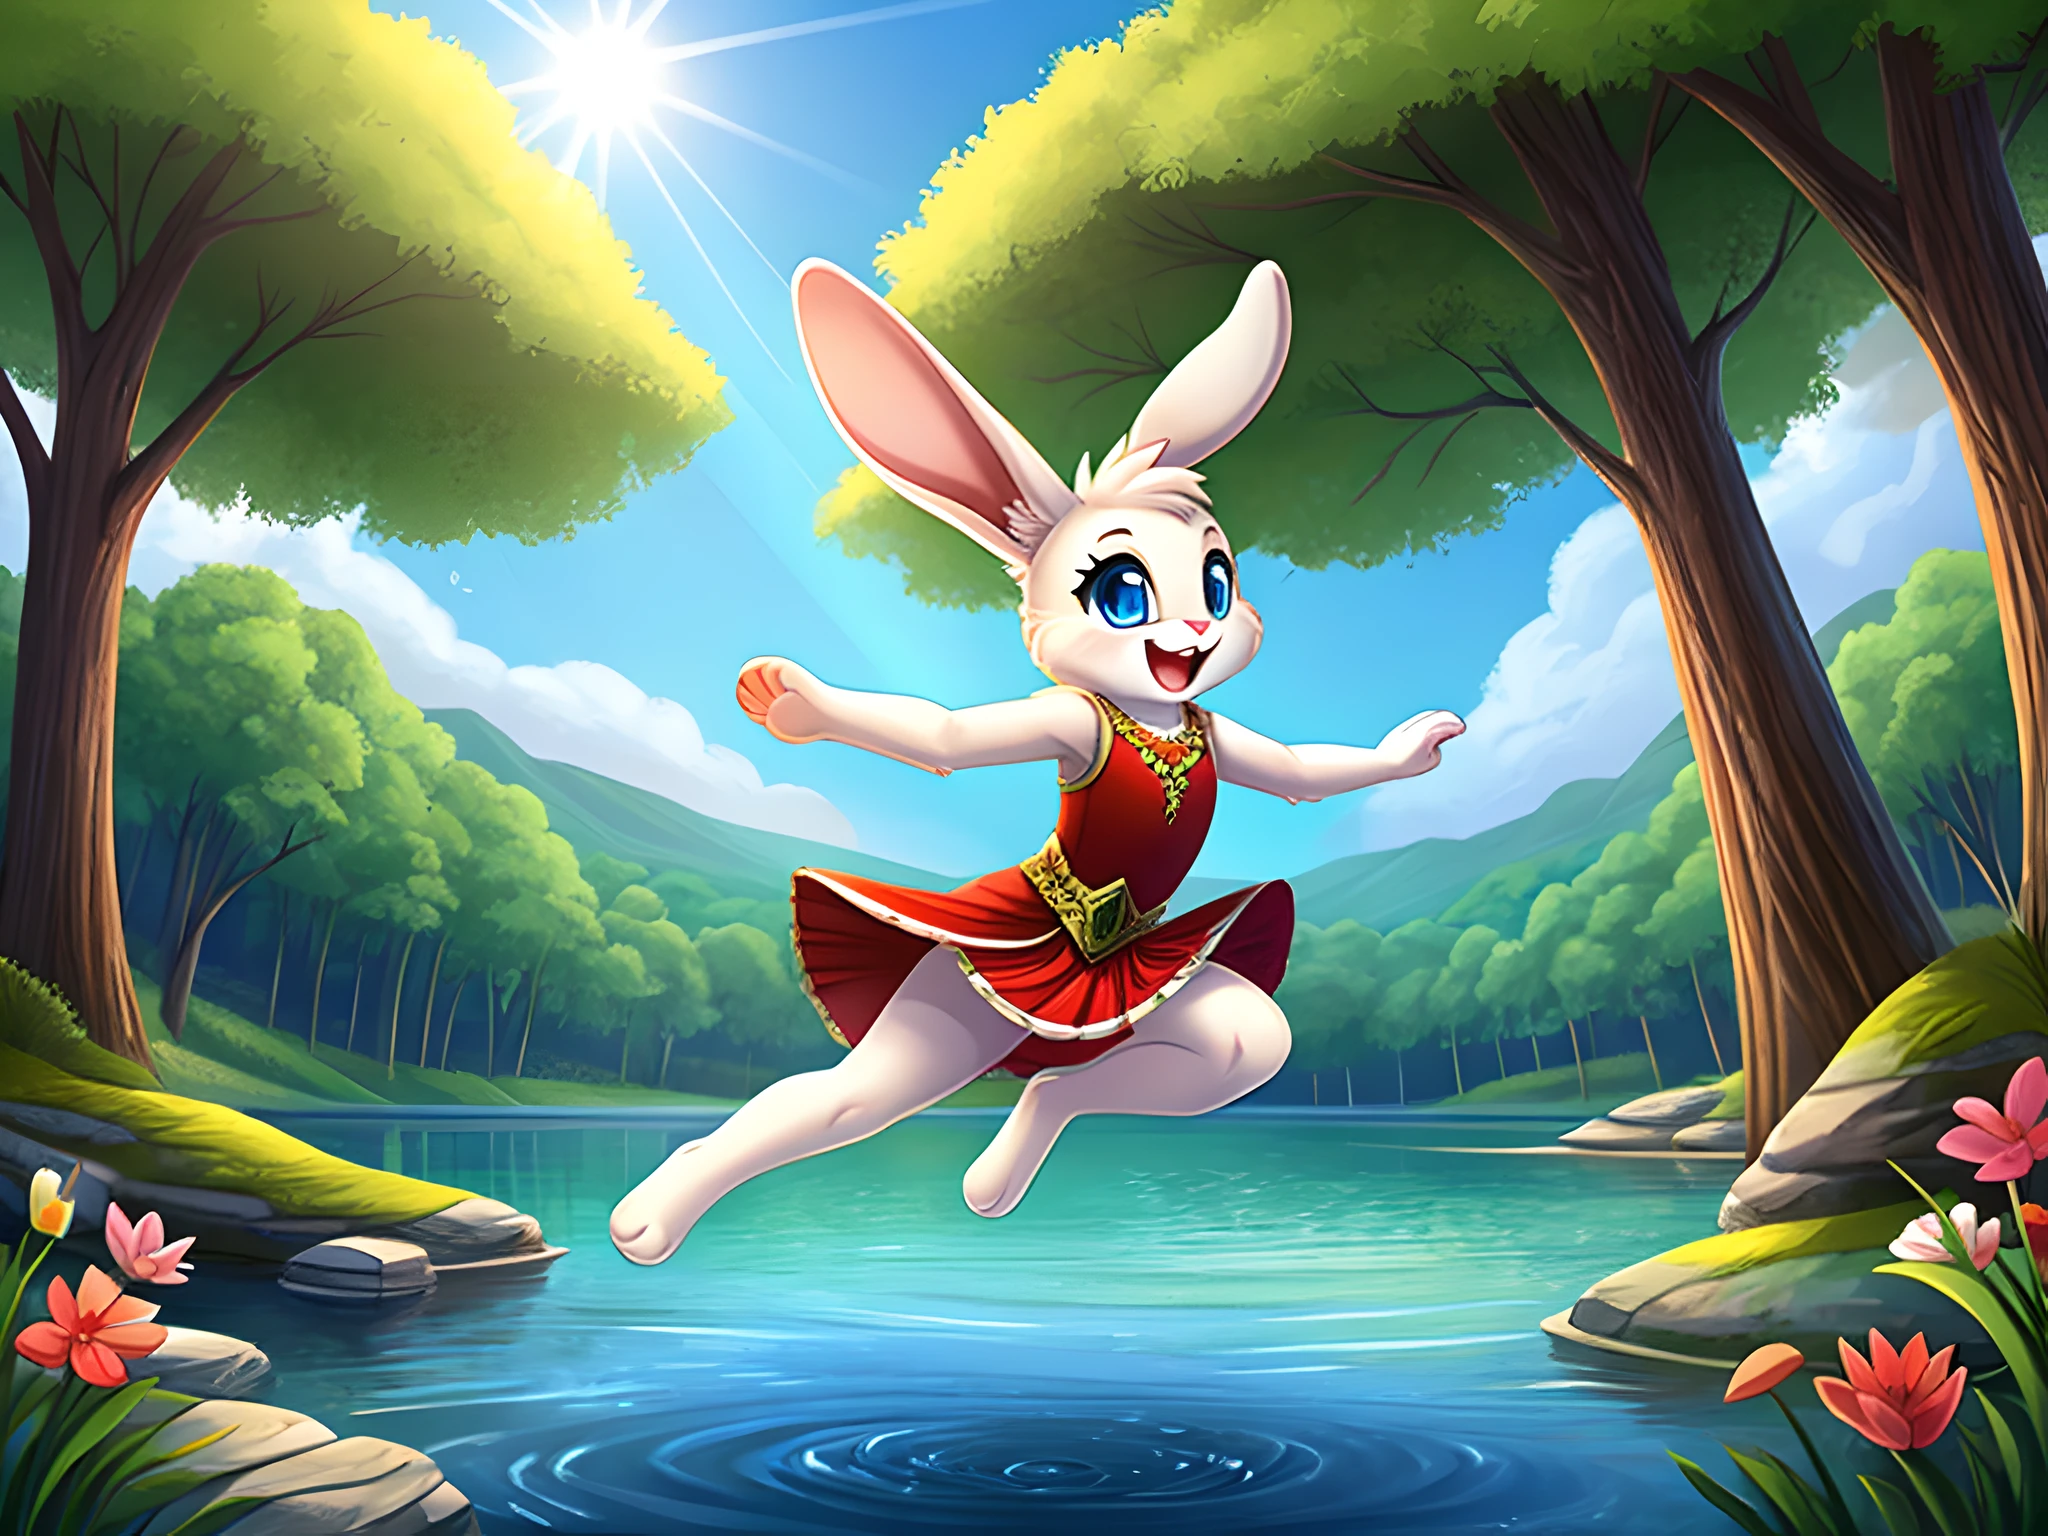 zoomed out image, fantasy style art, cute, adorable, short, tiny, little fluffy female white bunny with blue eyes, 2 extra ears, 4 ears, big floppy ears, long ears, ears perked up, raised ears, long eyelashes, poofy rabbit tail, smiling, jumping into a lake in a forest, cannonball, wearing a red frilly dress, big expressive smile, open mouth, wide eyes, excited eyes, excited face, stunning visuals, sunlight coming through the trees, digital illustration